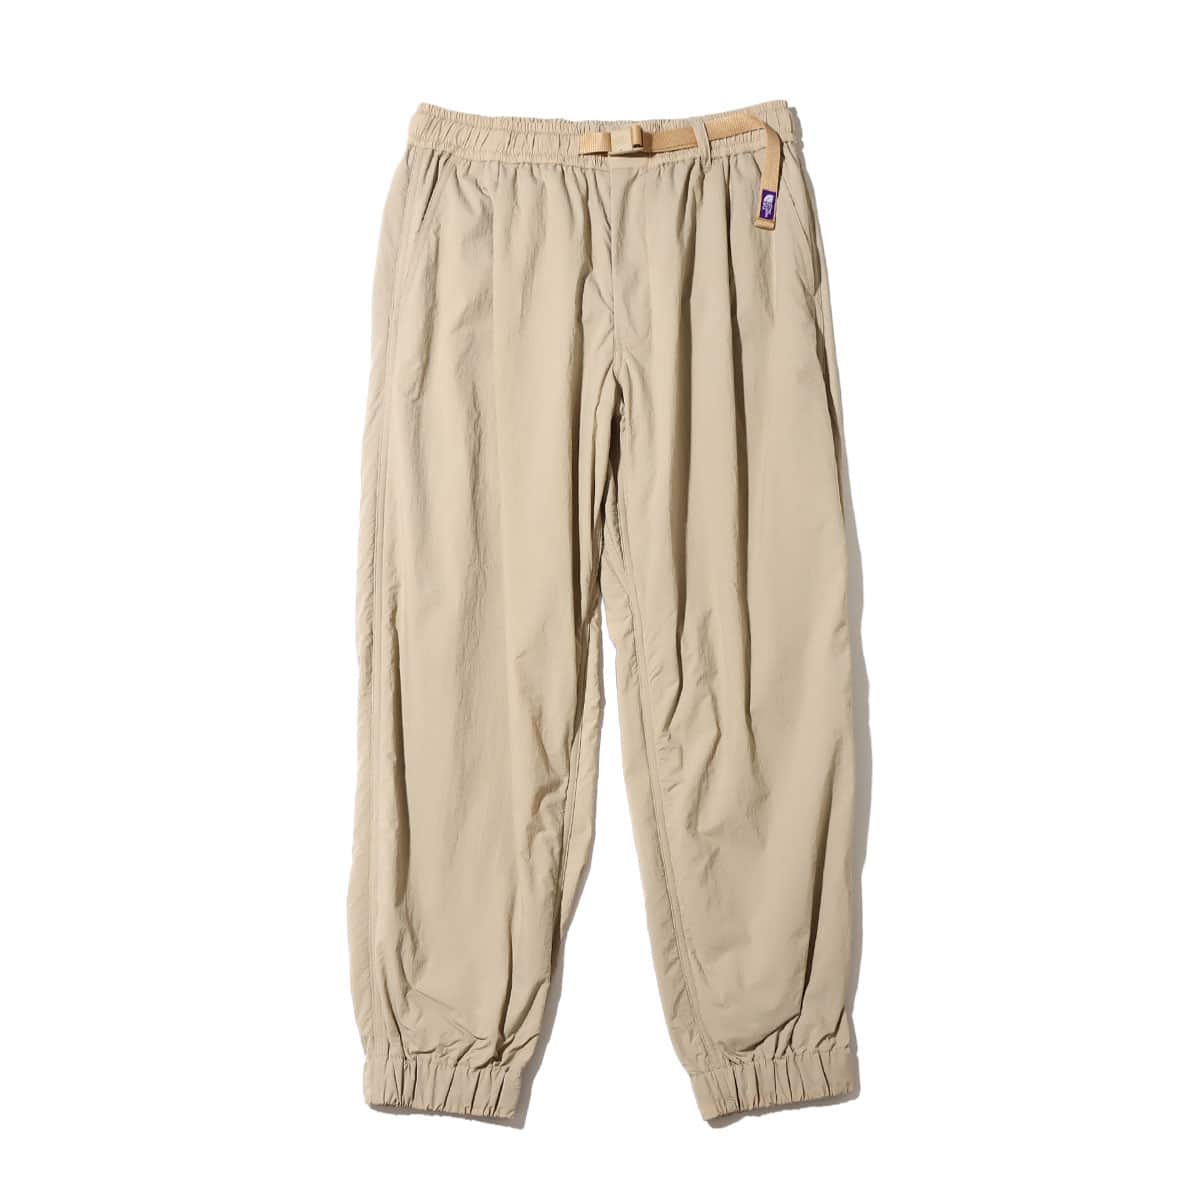 THE NORTH FACE PURPLE LABEL Nylon Ripstop Trail Pants Beige 23SS-I_photo_large